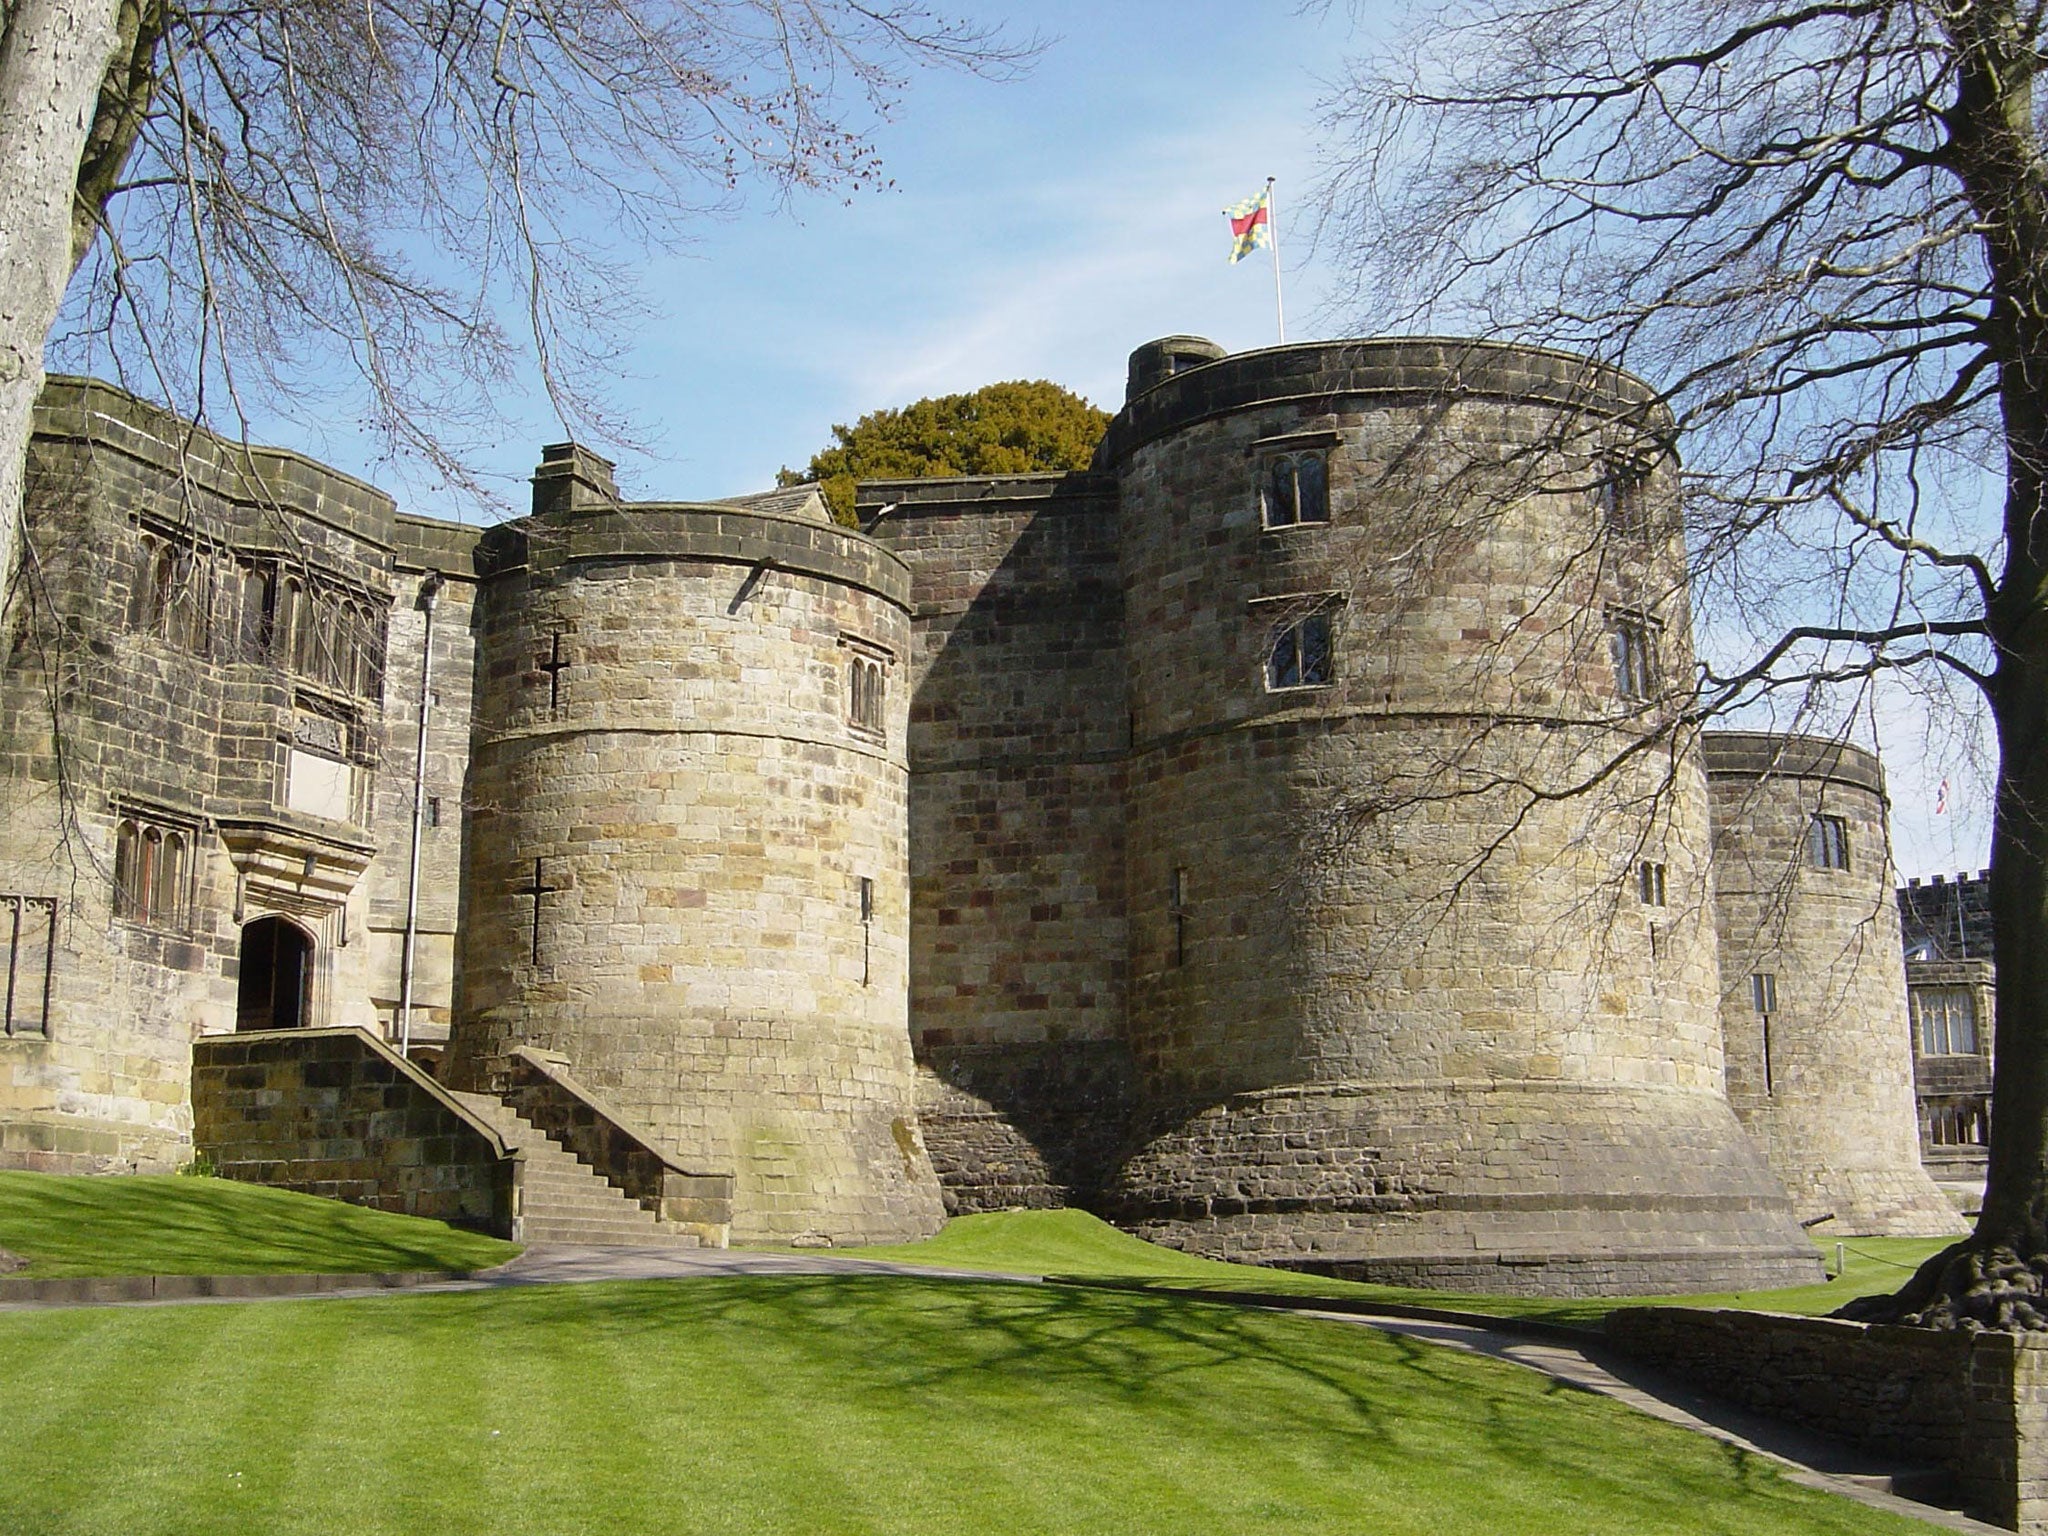 On the lookout: Skipton’s well-preserved medieval castle